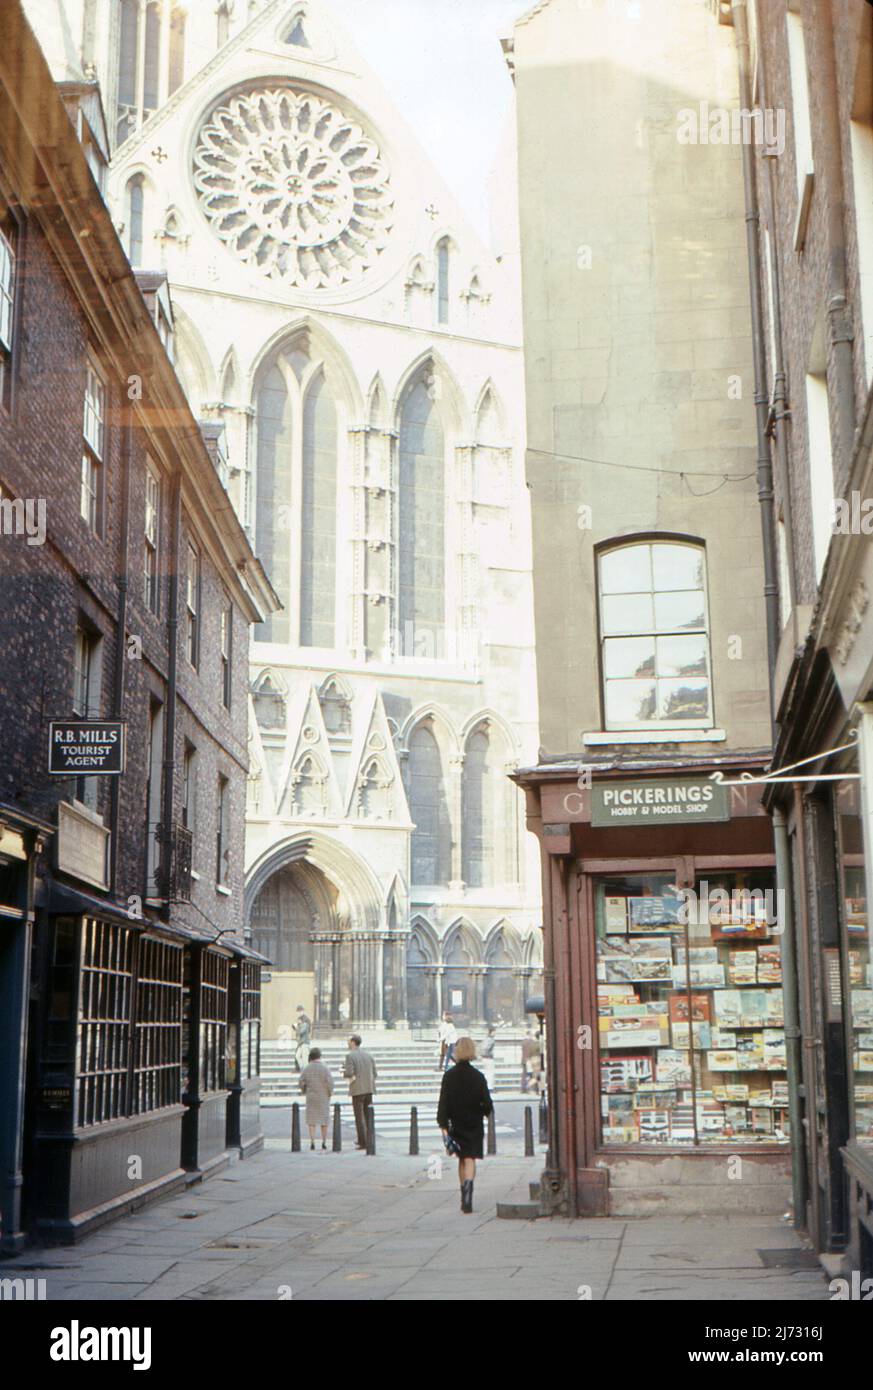 The southern façade of York Minster from Minster Gates, York, North Yorkshire.  1967. Shops are visible in the foreground including ‘R.B. Mills Tourist Agent’ and ‘Pickerings Hobby & Model Shop’. The latter has an interesting range of model kits displayed in its window. Stock Photo